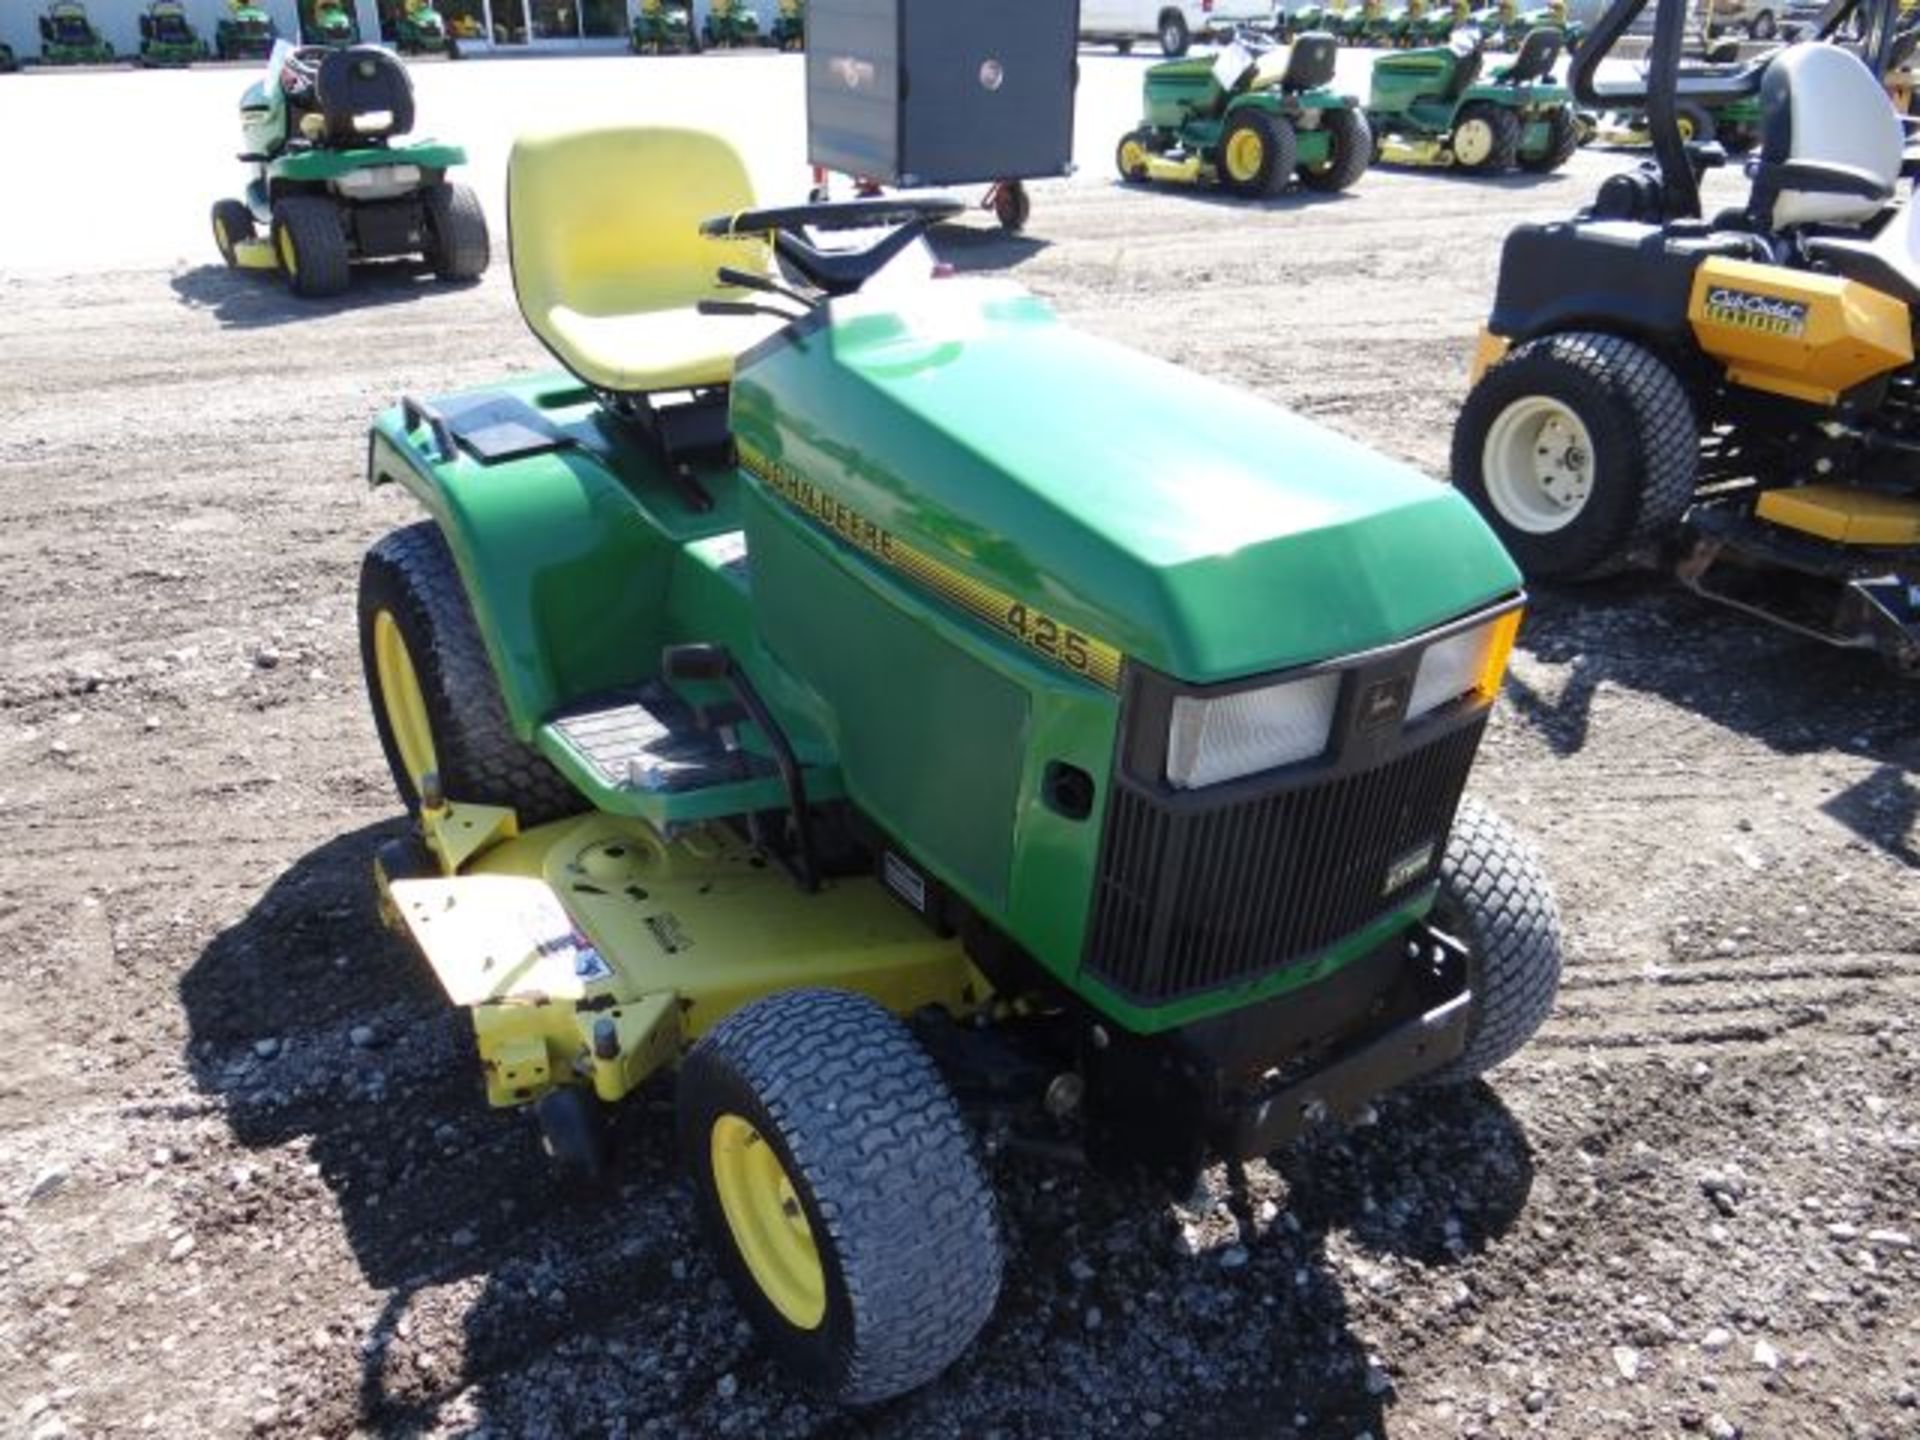 Lot 23333 - 1994 JD 425/54 Mower 1431 hrs, 20hp, Kawasaki, Water Cooled, Hydro, Power Steer, Diff - Image 3 of 4